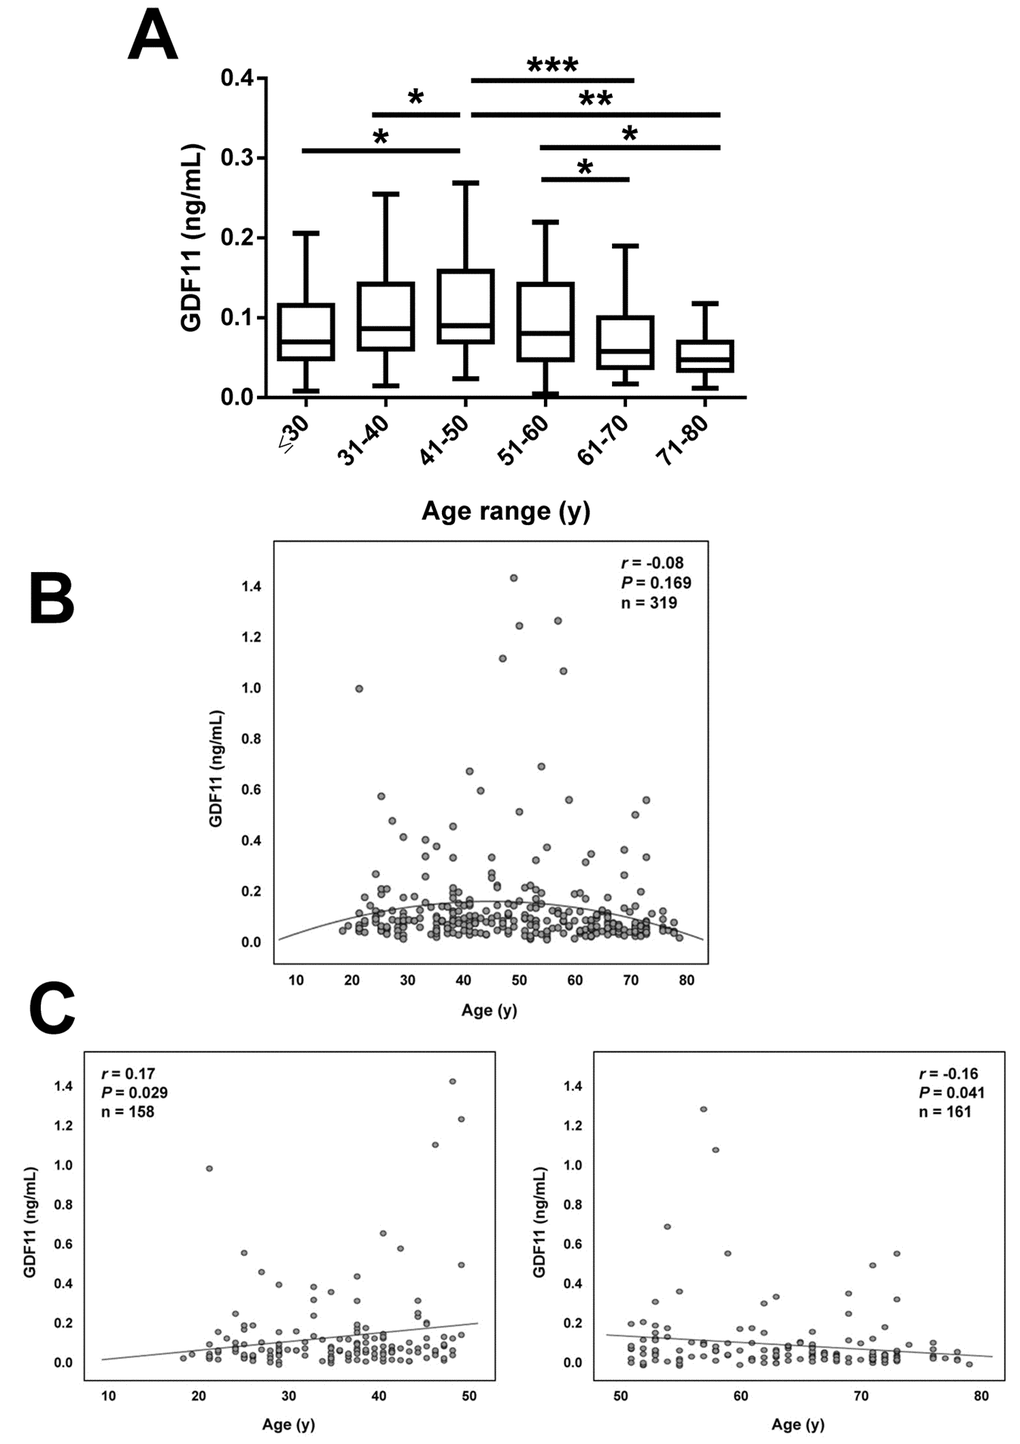 Effect of aging on serum GDF11 concentrations. (A) Comparison of serum GDF11 in the whole sample aged between 18 and 79 y segregated by decades (≤30 y, n=53), (31-40 y, n=54), (41-50 y, n=51), (51-60 y, n=54), (61-70 y, n=59), (71-80 y, n=48). Box represents interquartile range and median inside, with whiskers plotted according to the Tukey method. Statistical differences between groups were analyzed by one-way ANOVA followed by Fisher’s LSD tests. *PPPB) Scatter diagram showing the relationship between circulating concentrations of GDF11 and age. Pearson’s correlation coefficient and P value are indicated. The quadratic line of adjustment of data is shown. (C) Scatter diagrams showing the correlation between circulating concentrations of GDF11 and age in the subjects segregated by being below (left) or over (right) 50 years of age. Pearson’s correlation coefficients and P values are indicated.